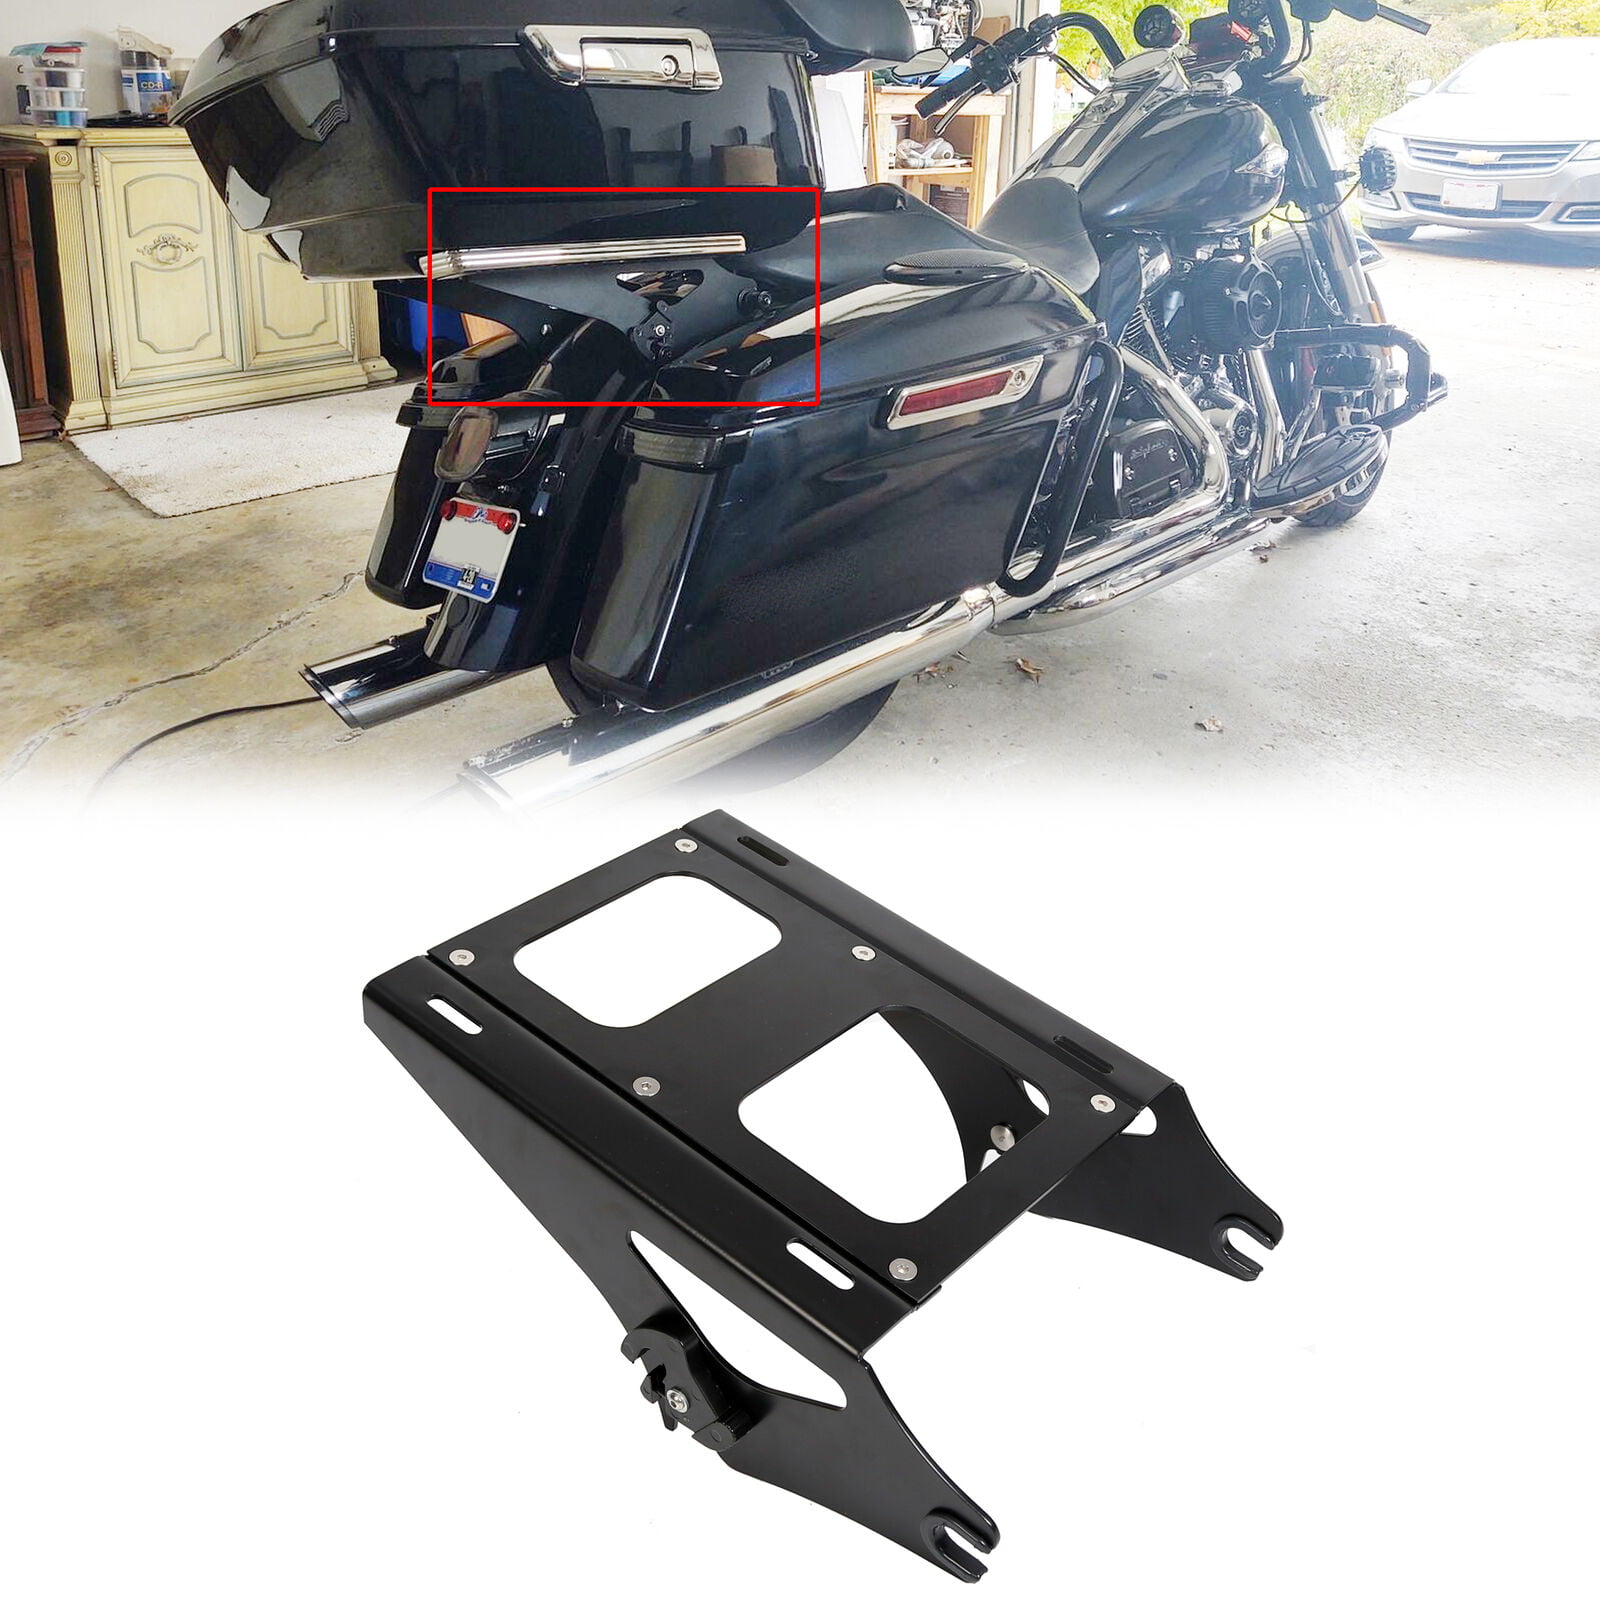 XFMT Black Detachable Tour Pak Pack Two Up Luggage Rack Mounting Compatible with Harley Davidson FLHT FLHX FLTR Electra Road Glide Touring Models 1997-2008